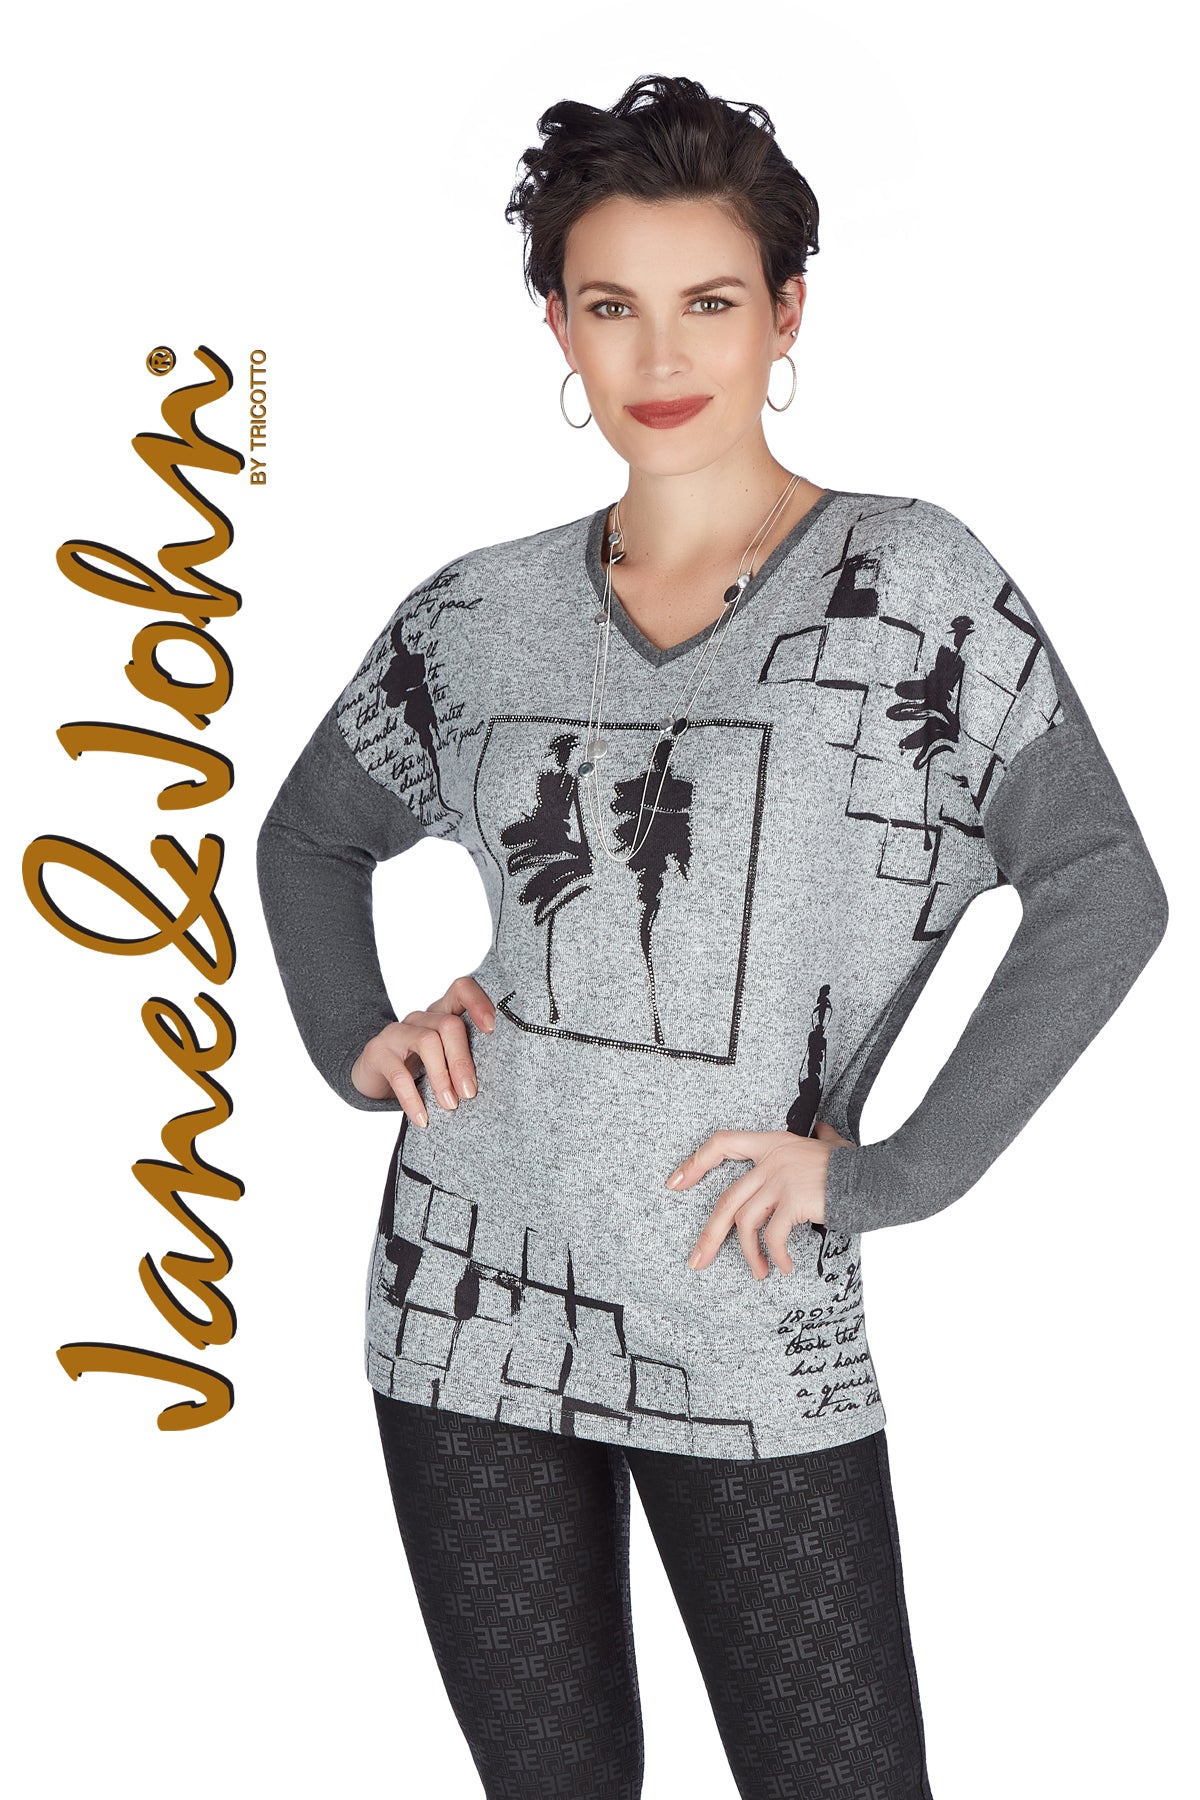 Tricotto Online Sweater Shop-Tricotto Fashion Montreal-Jane & John Sweaters-Tricotto Fall 2022 Collection